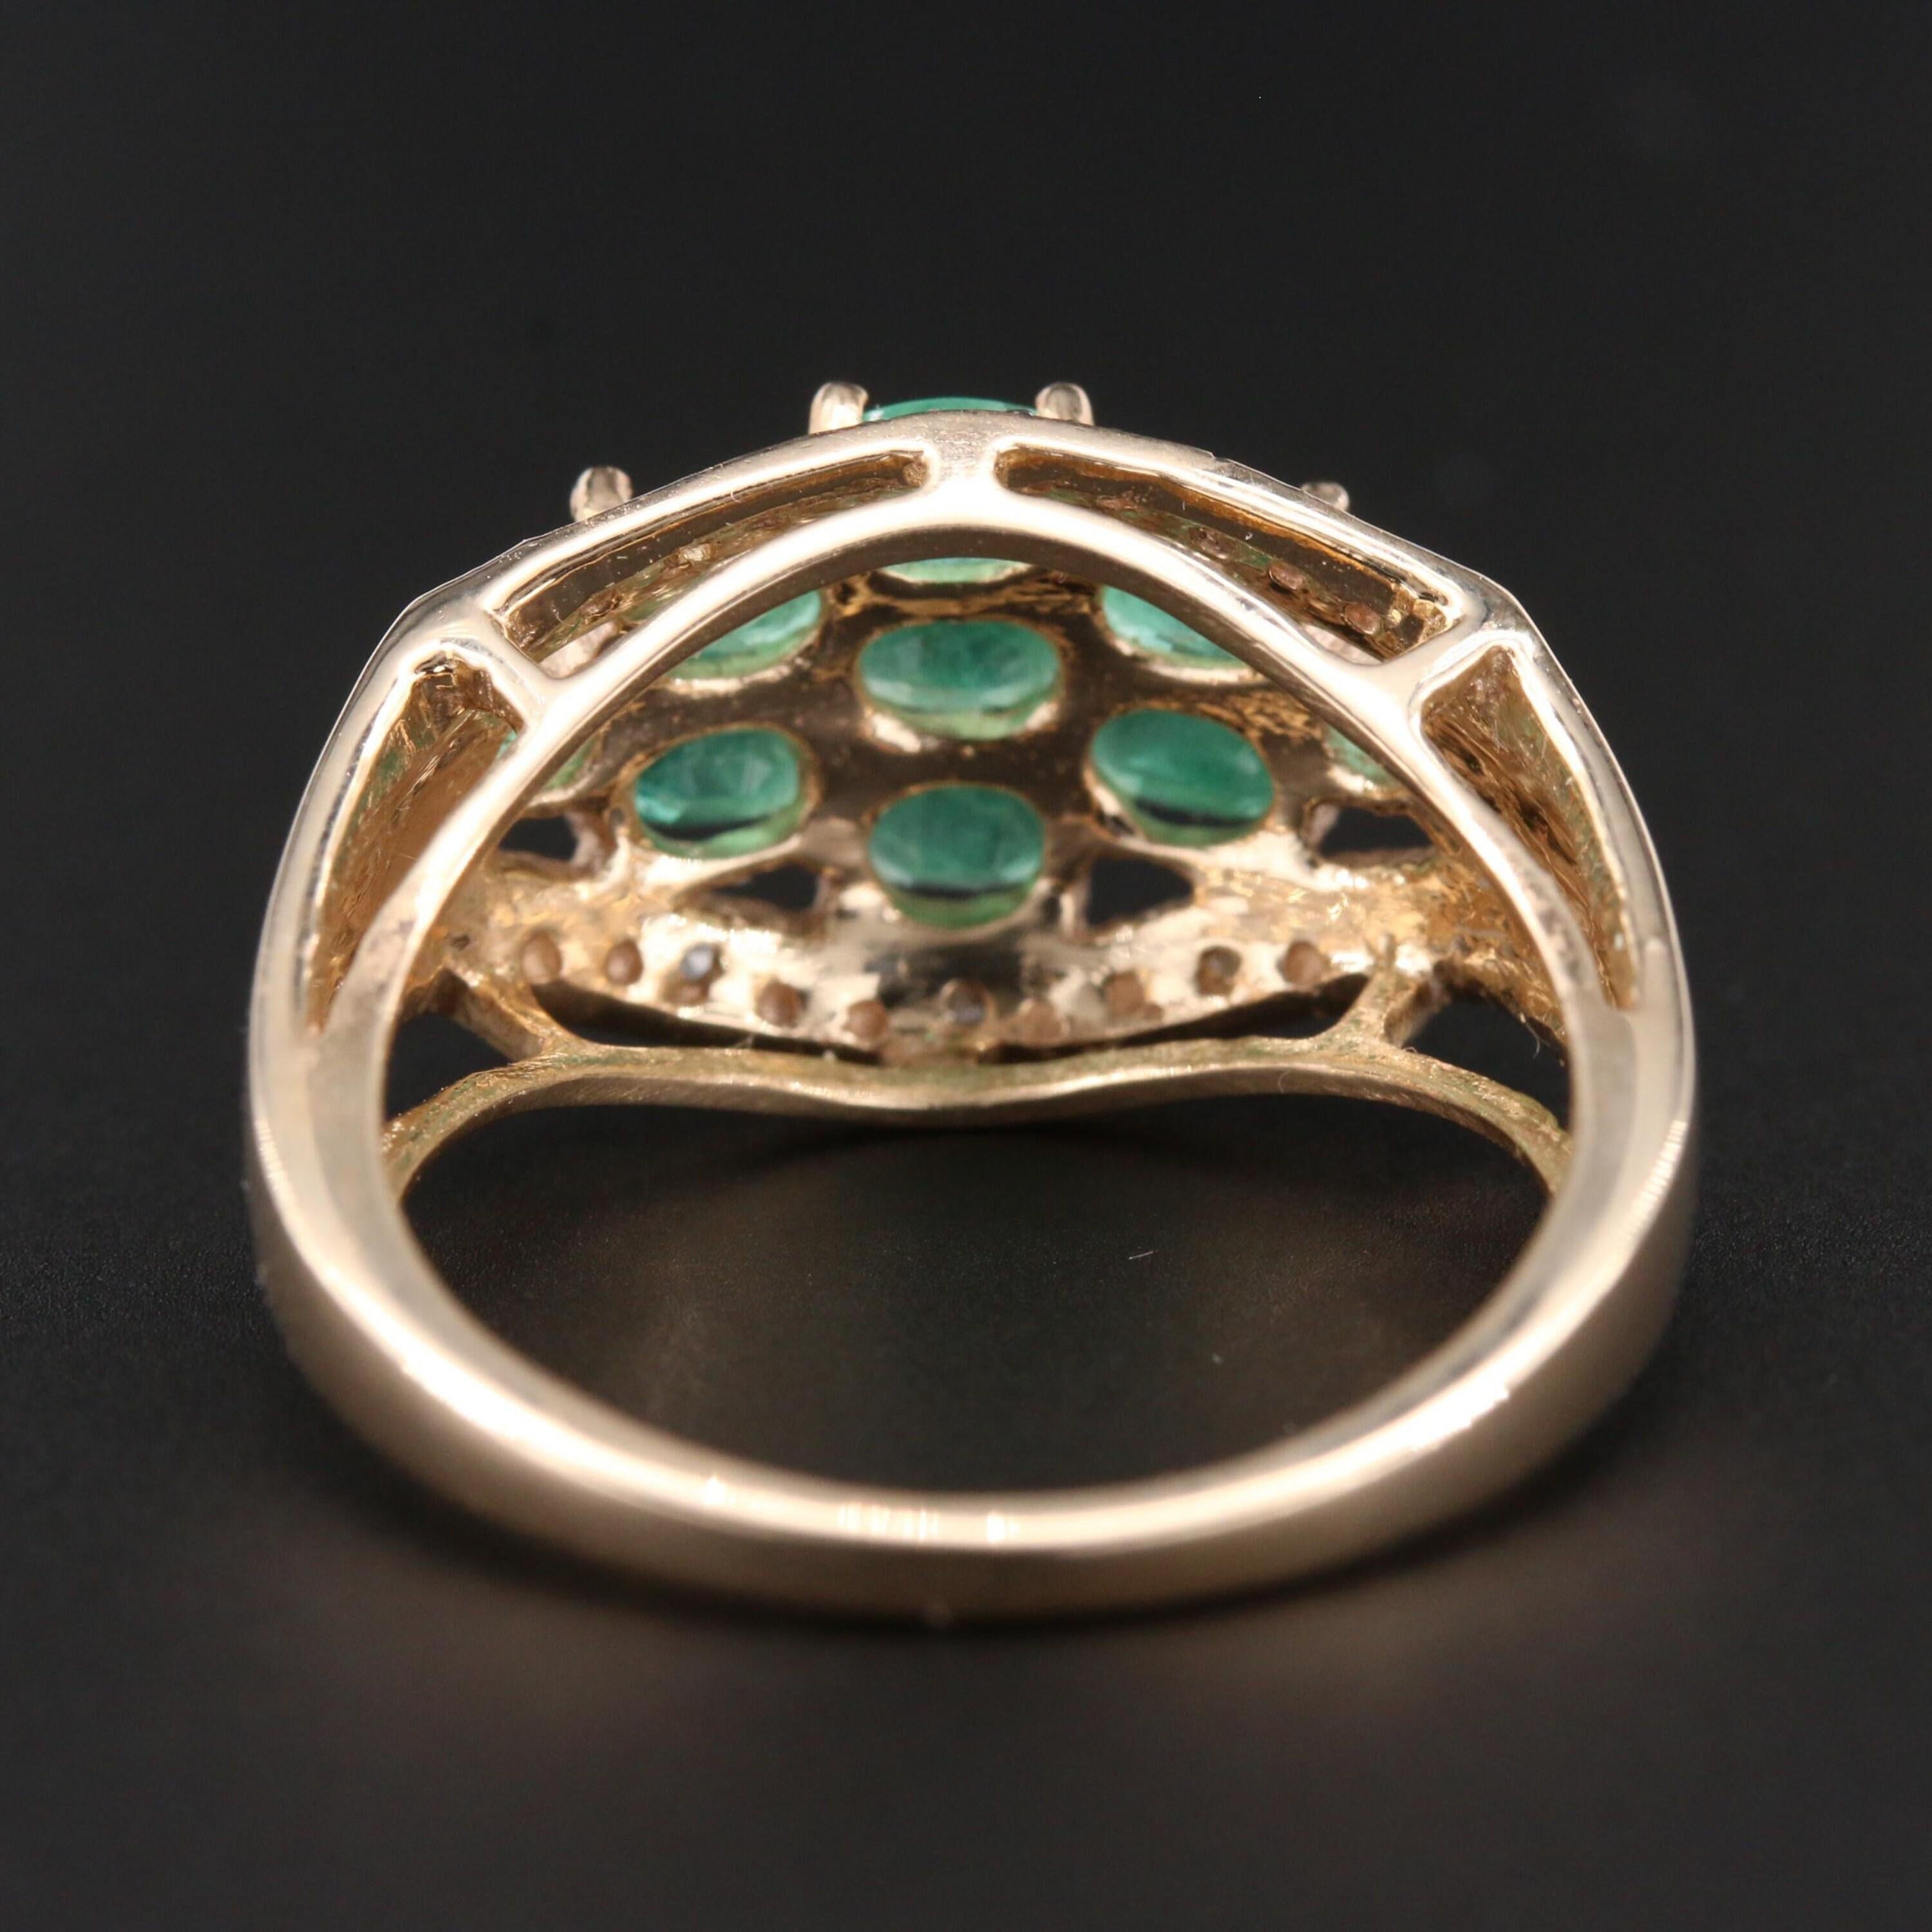 For Sale:  Halo Emerald Engagement Ring, Antique Emerald Wedding Ring 4